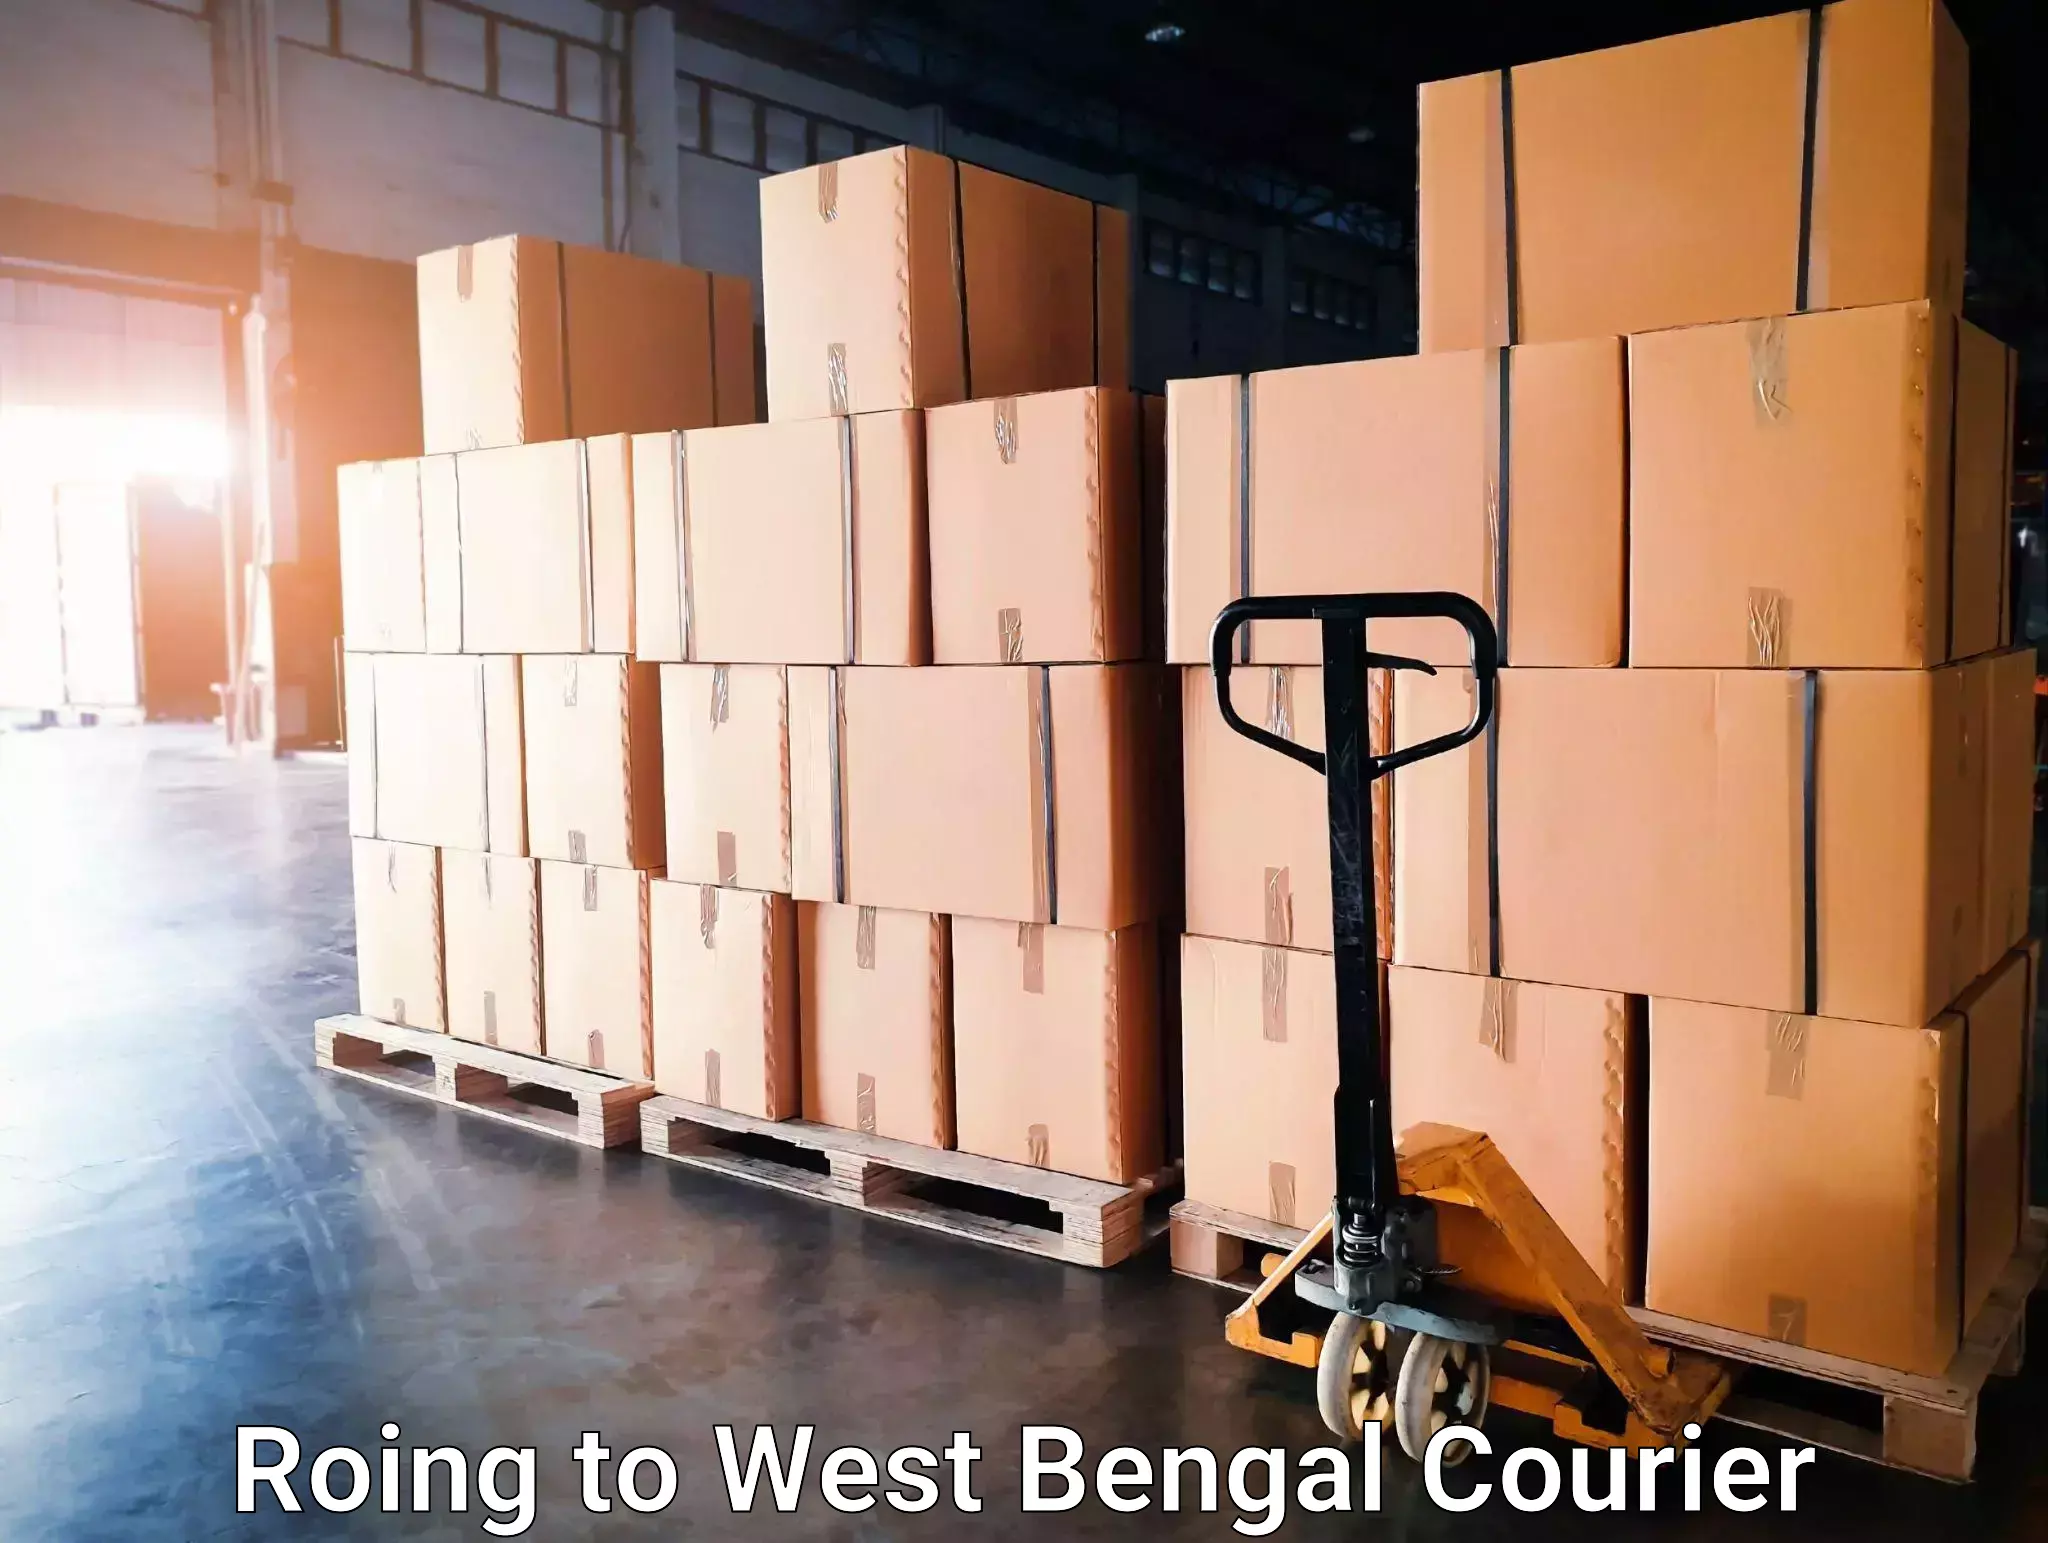 Courier service partnerships Roing to West Bengal